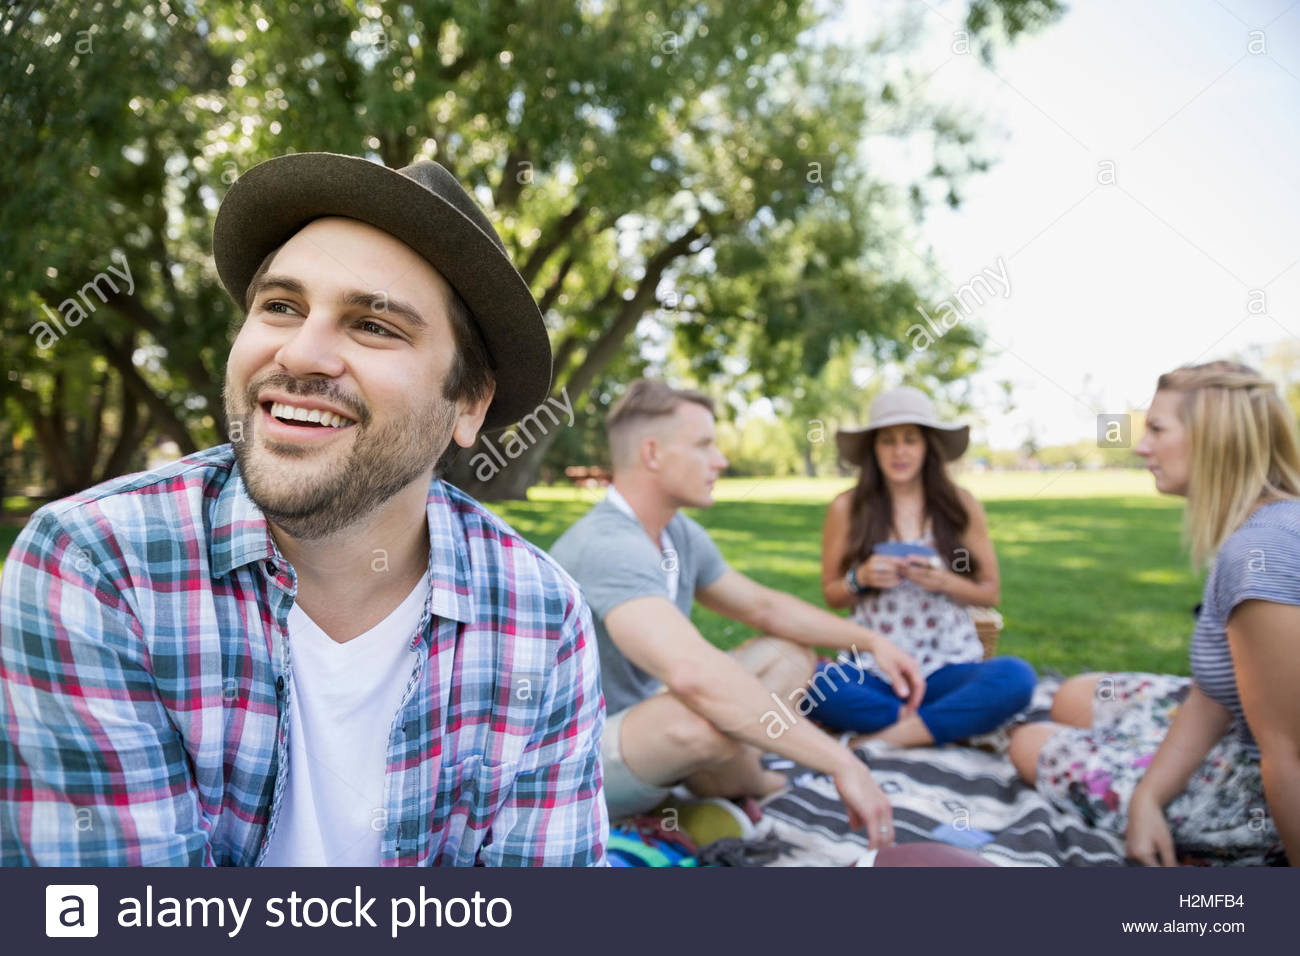 Smiling man with friends in summer park Stock Photo